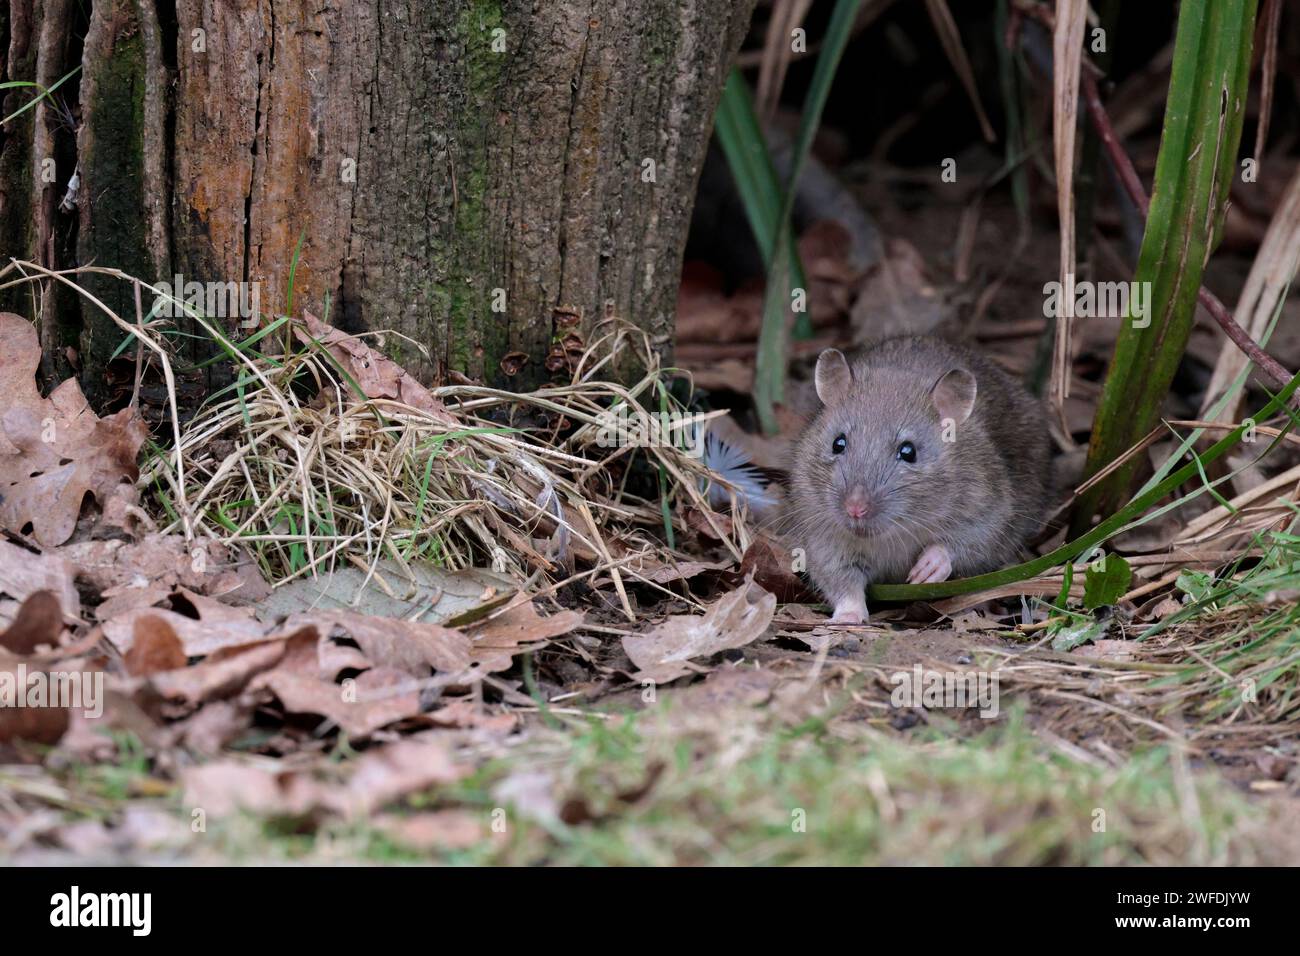 Brown rat Rattus norvegicus, in bird hide grey brown fur pointed face small round ears pink feet and nose long scaly tapered tail darting out to feed Stock Photo